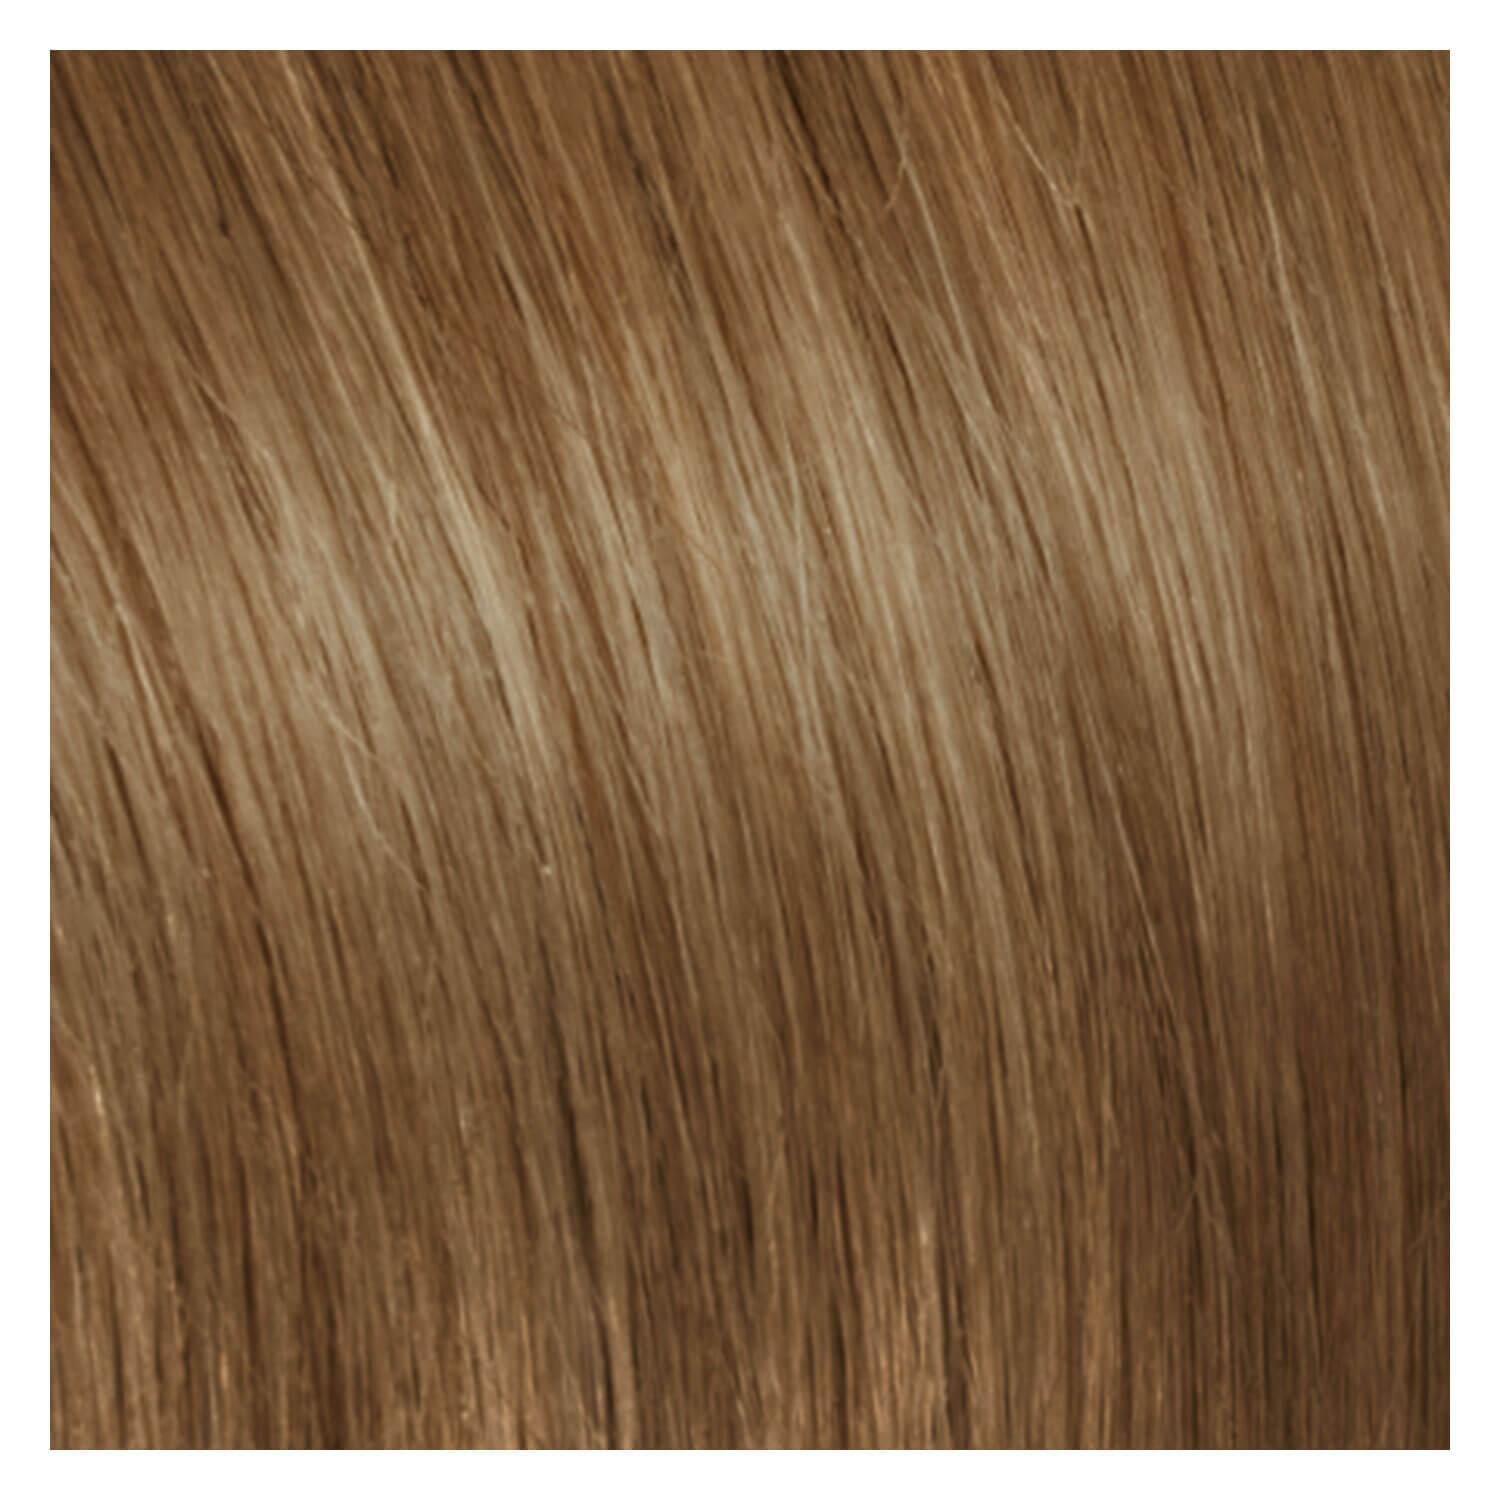 SHE Tape In-System Hair Extensions Straight - 14 Natural Light Blond 40/45cm